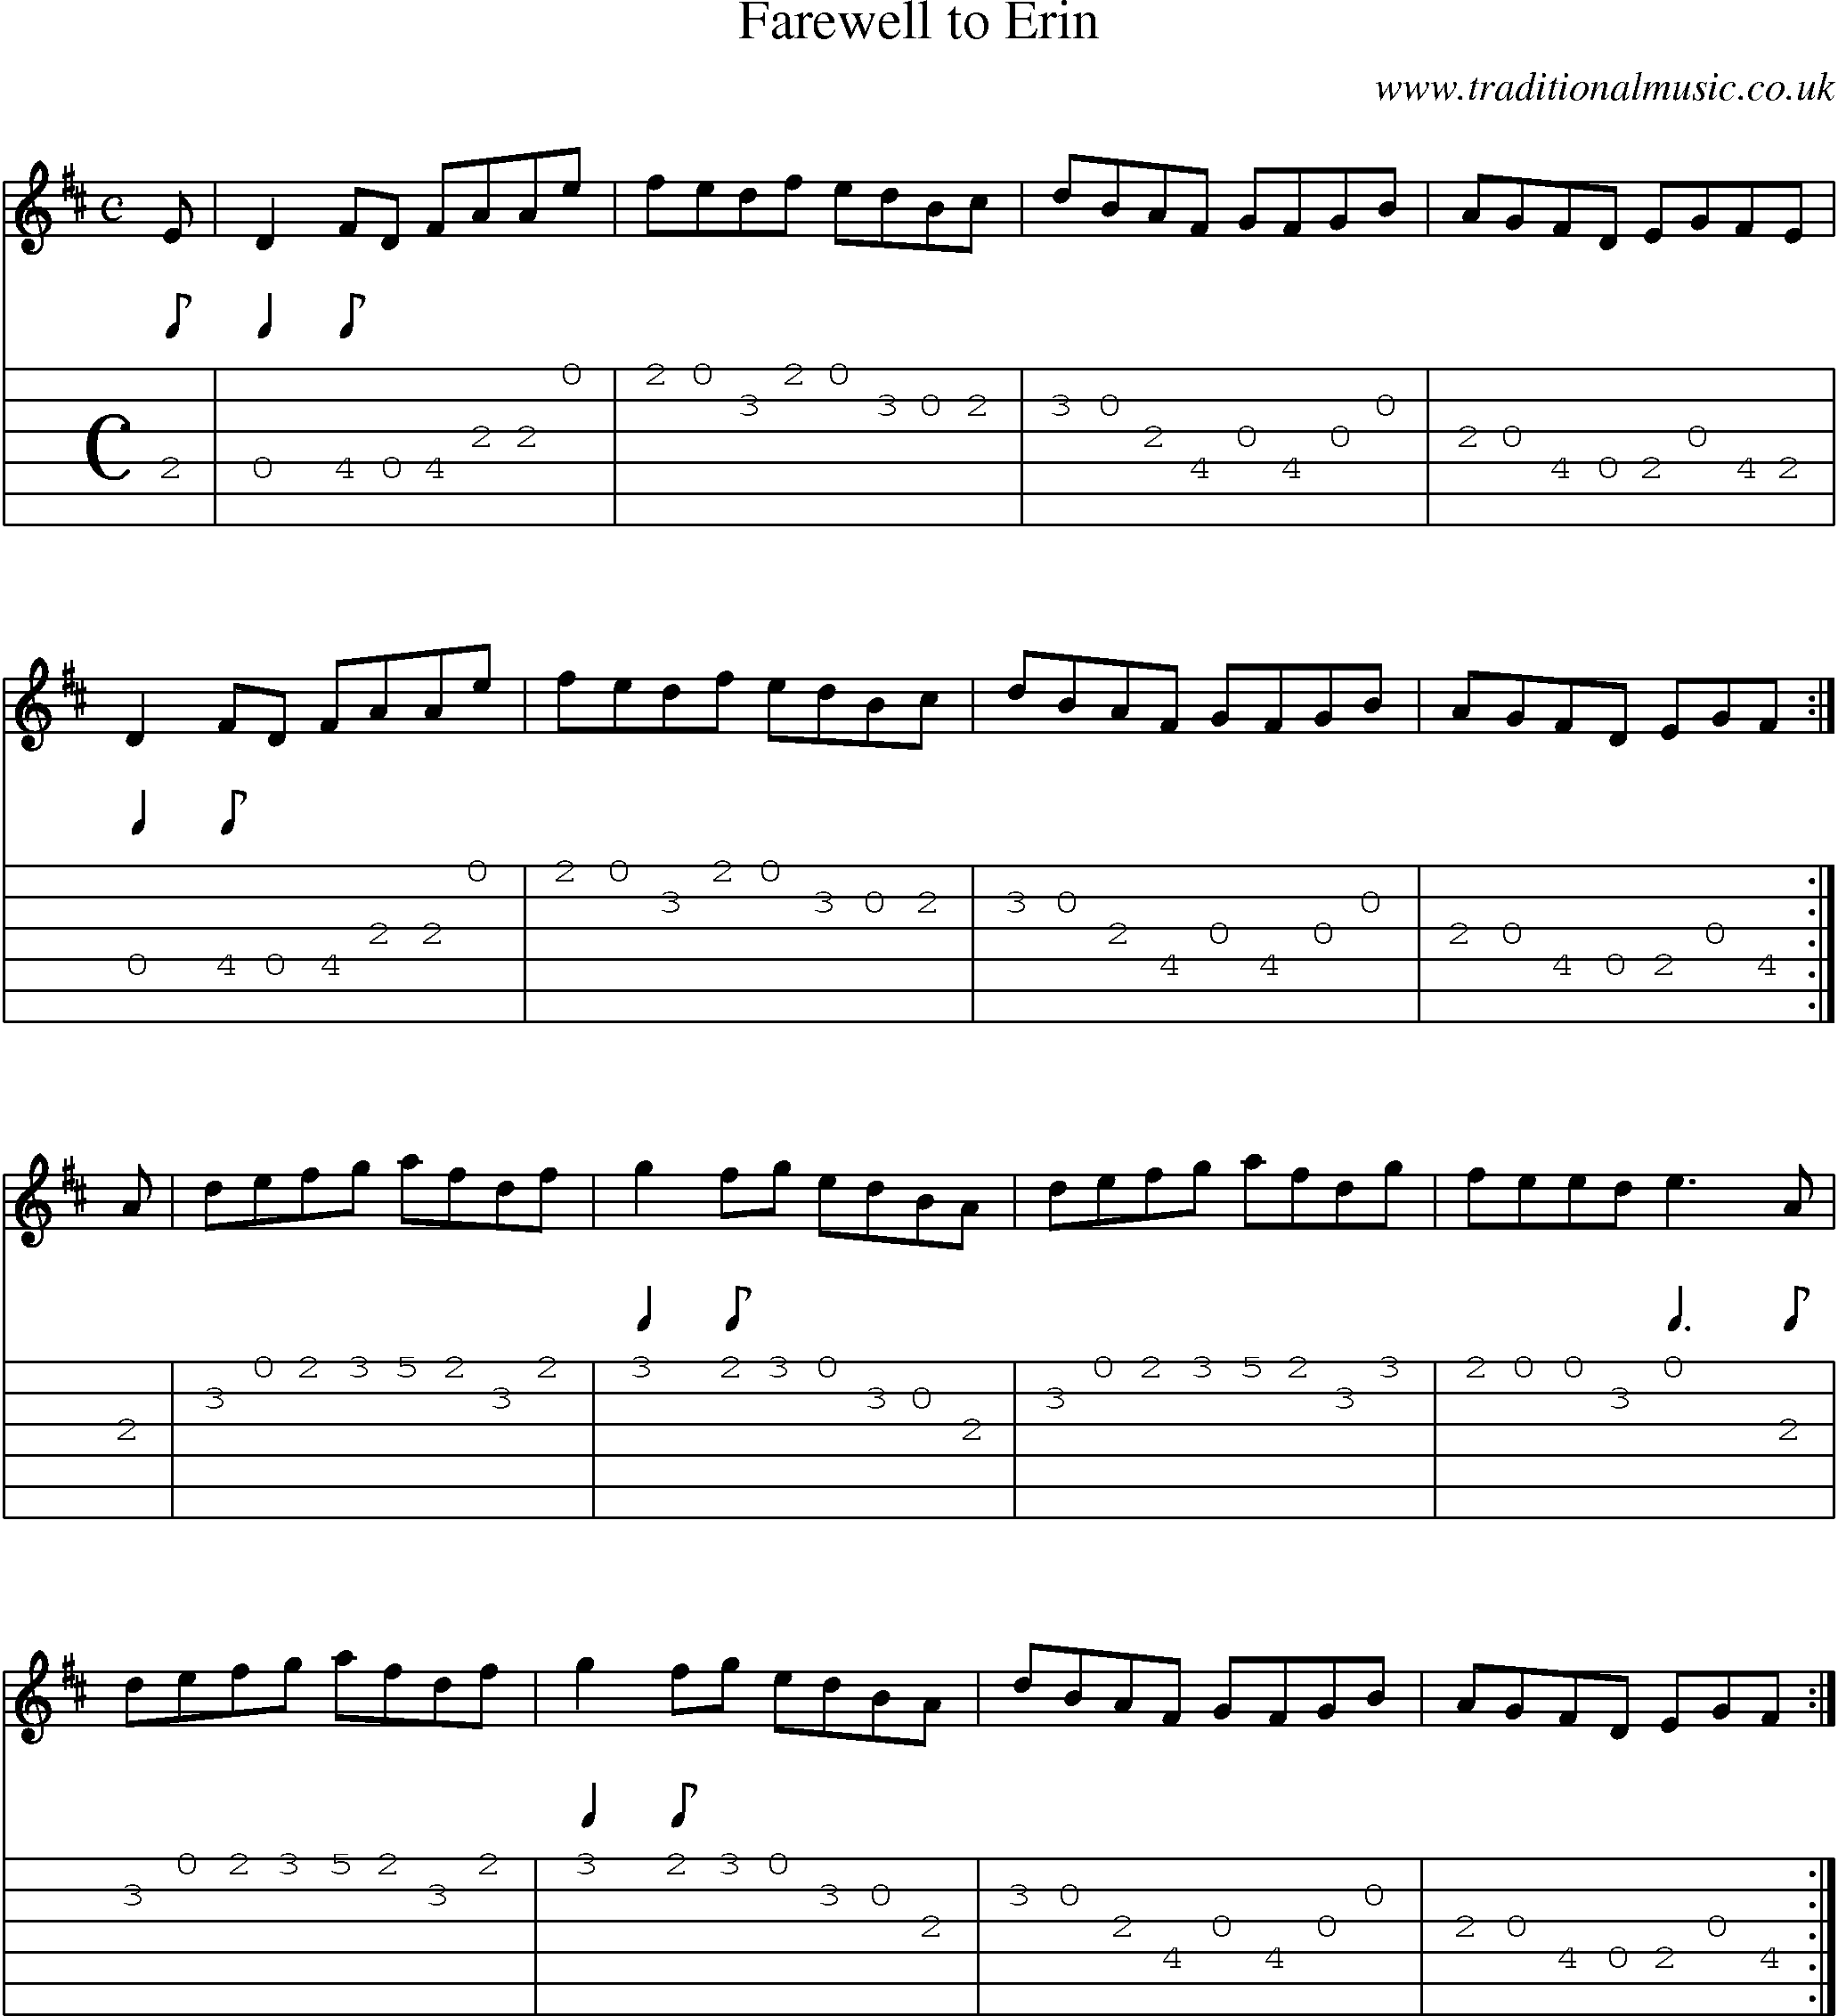 Music Score and Guitar Tabs for Farewell To Erin